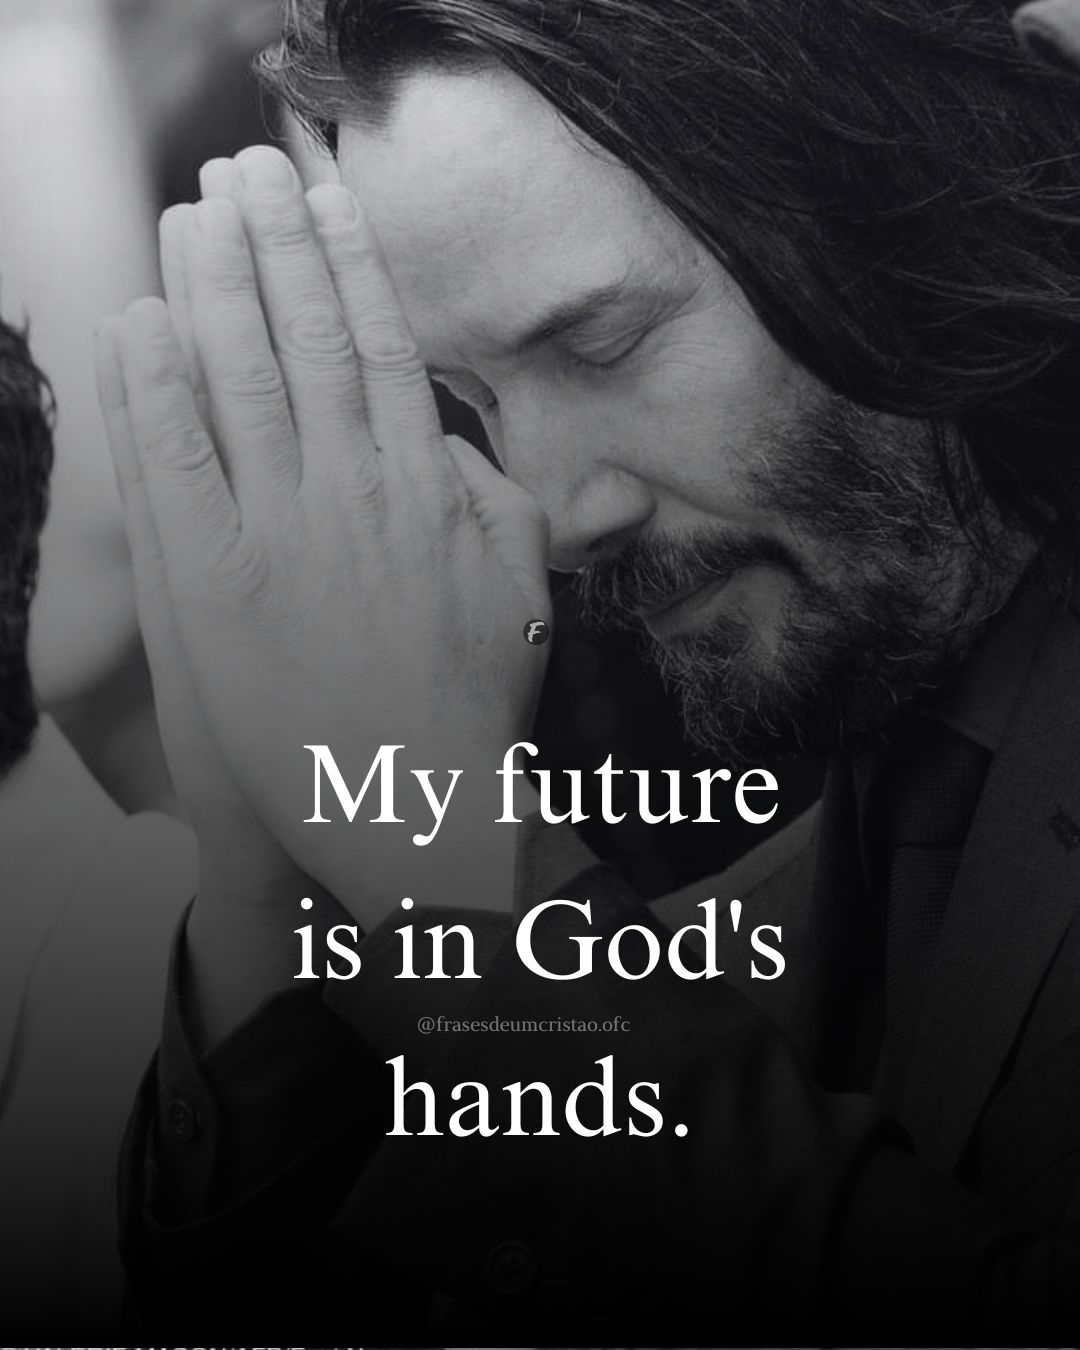 My future is in God's hands.